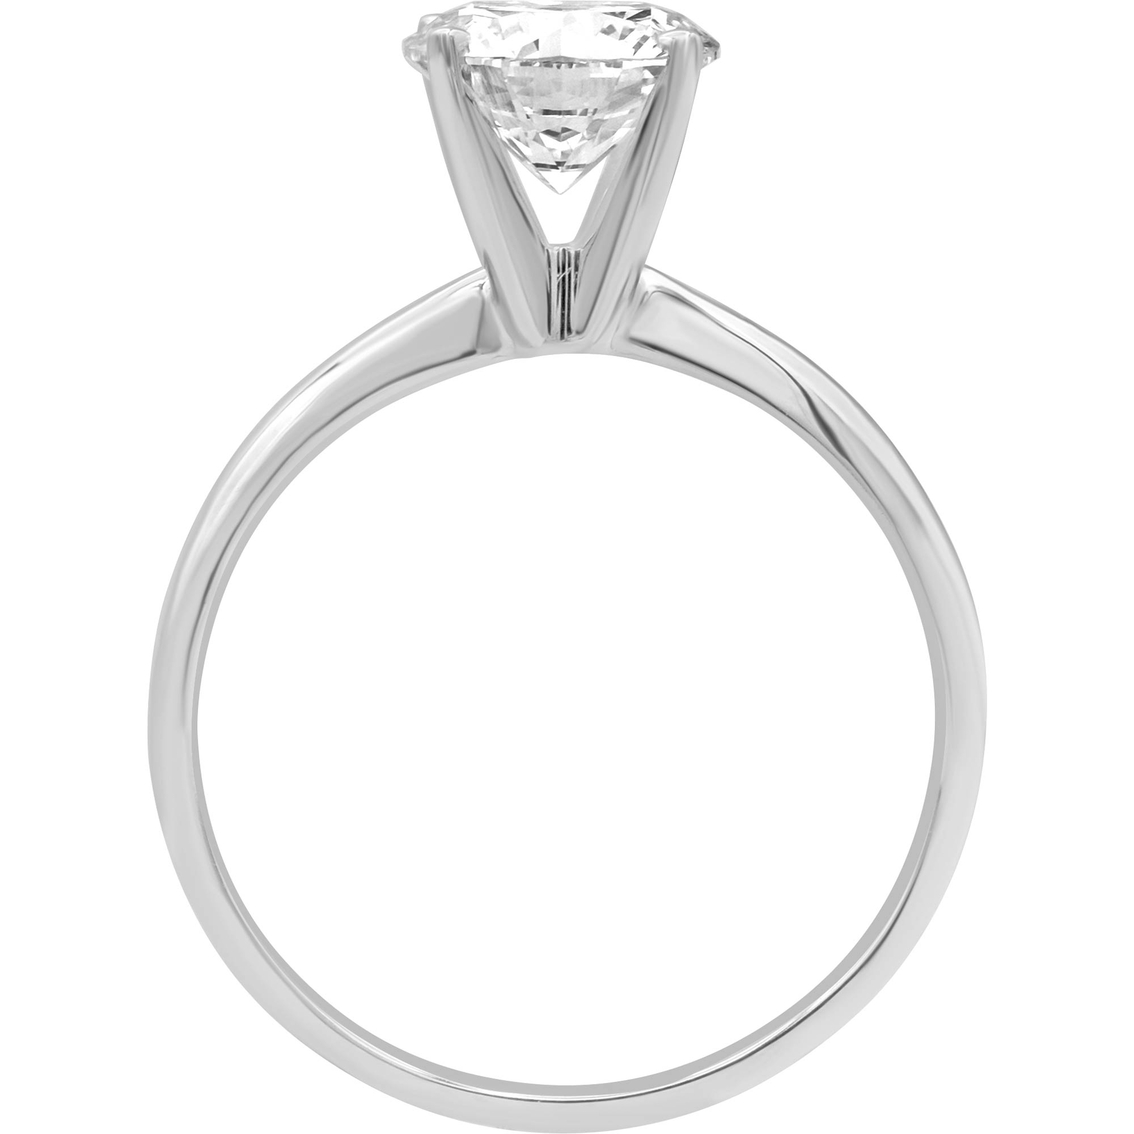 14K White Gold 1 1/2 ct. Diamond Solitaire Ring, Size 7 - Image 4 of 5